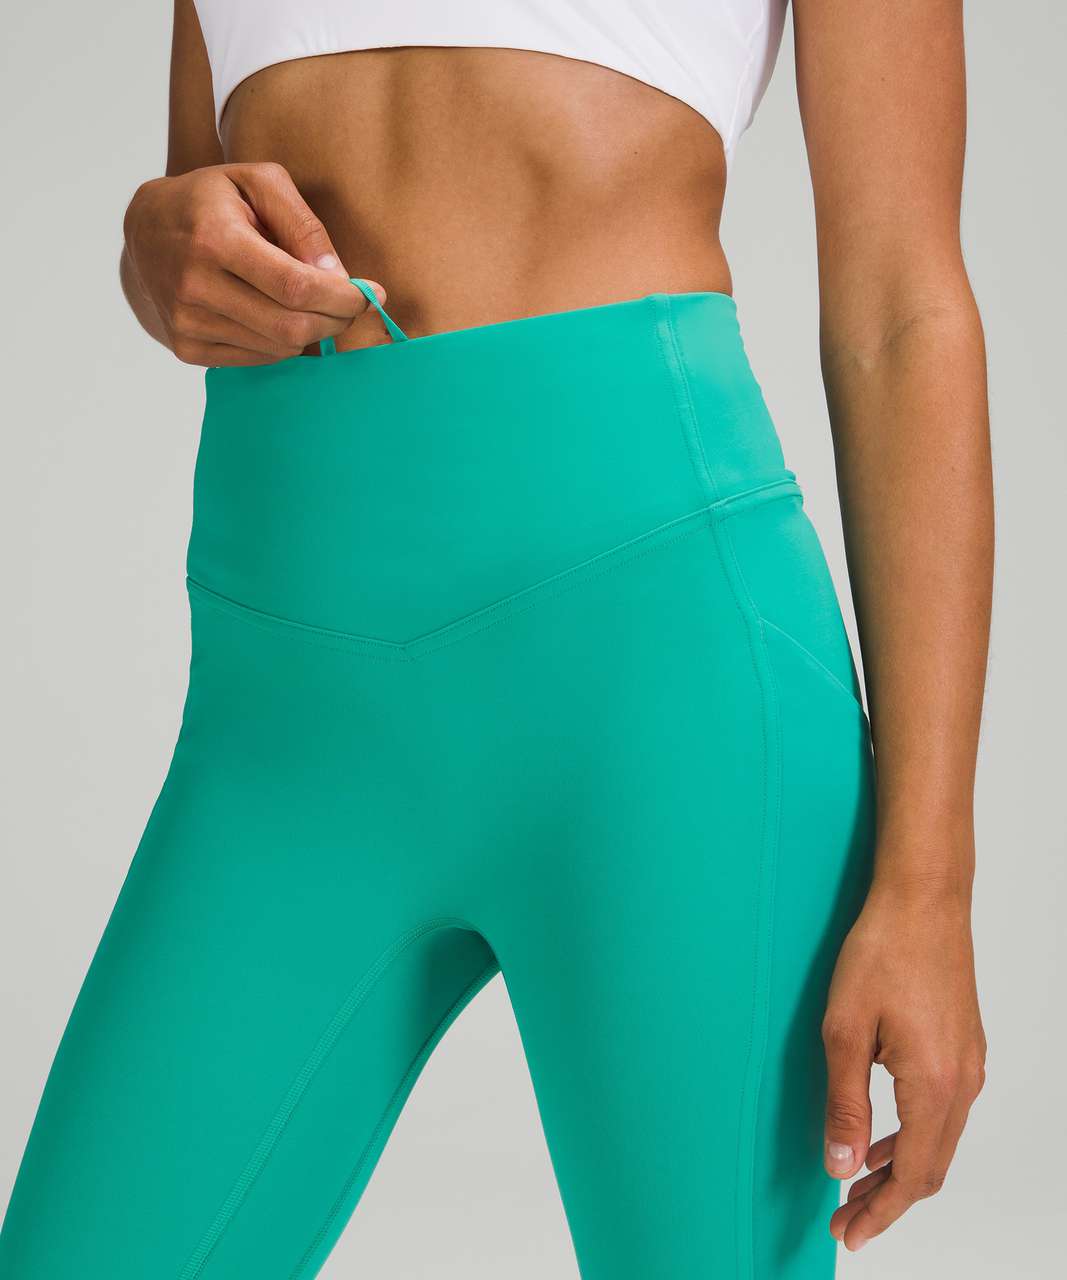 Disappointed that my first pair of bright colored wunder unders (Maldives  green 4) shows sweat stains. Guess I'll stick to darker colors from now on!  : r/lululemon